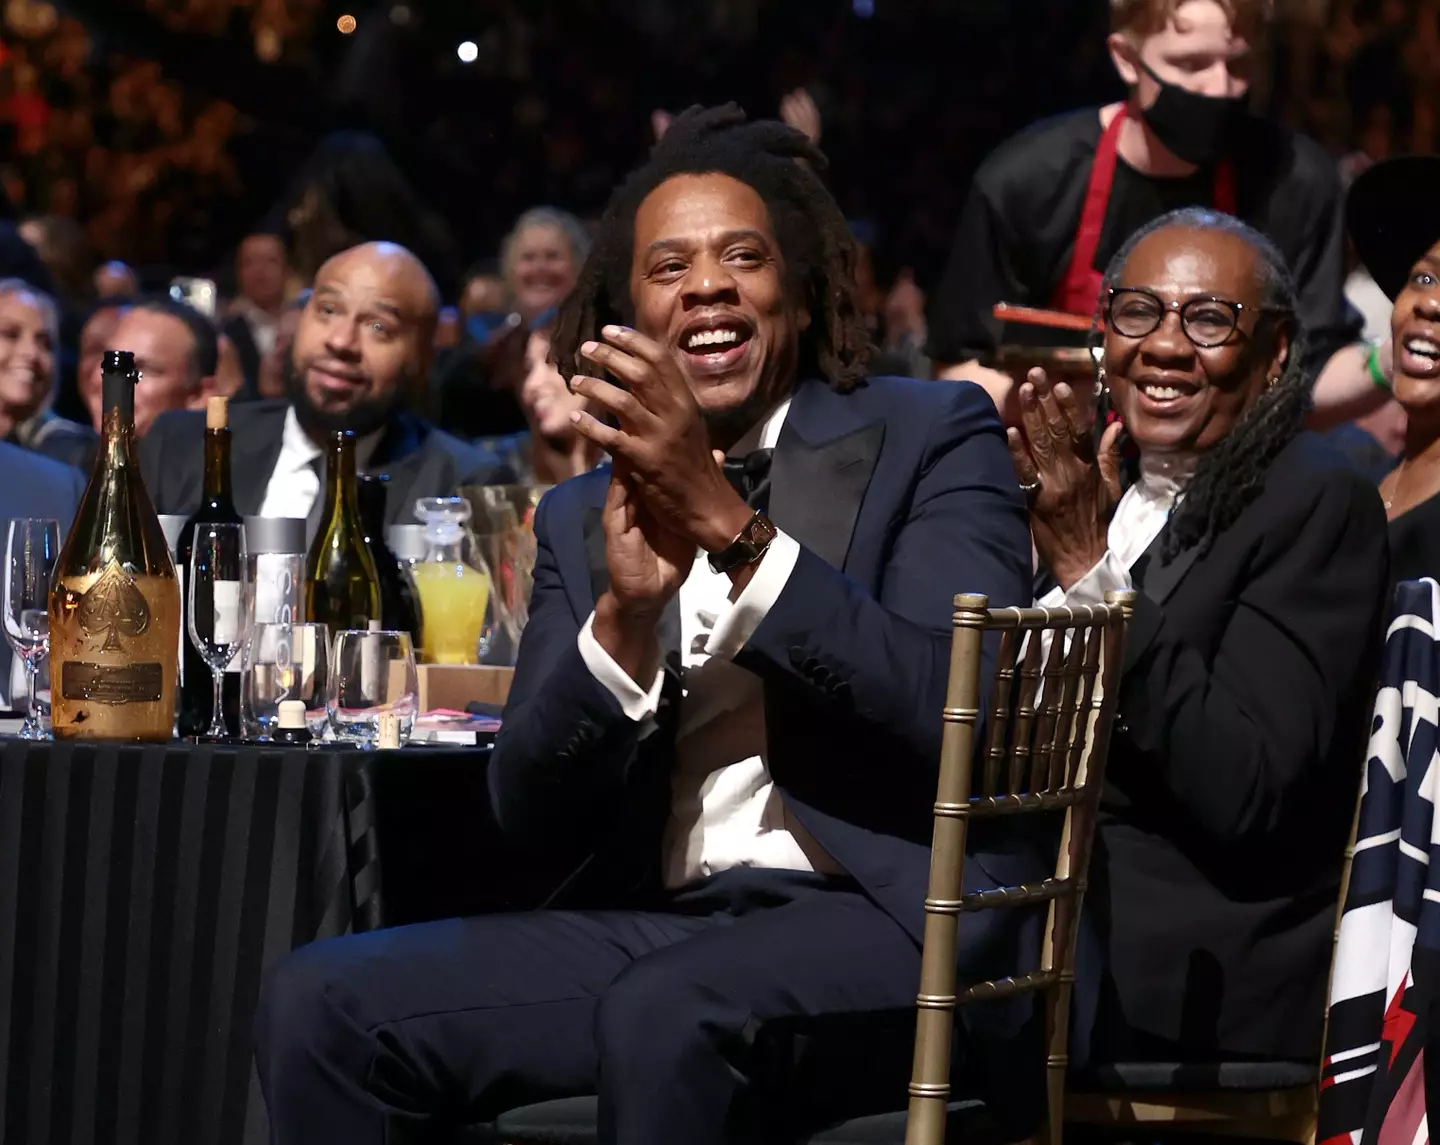 Jay-Z said that if his fans wanted wisdom from him, they could turn to his music.